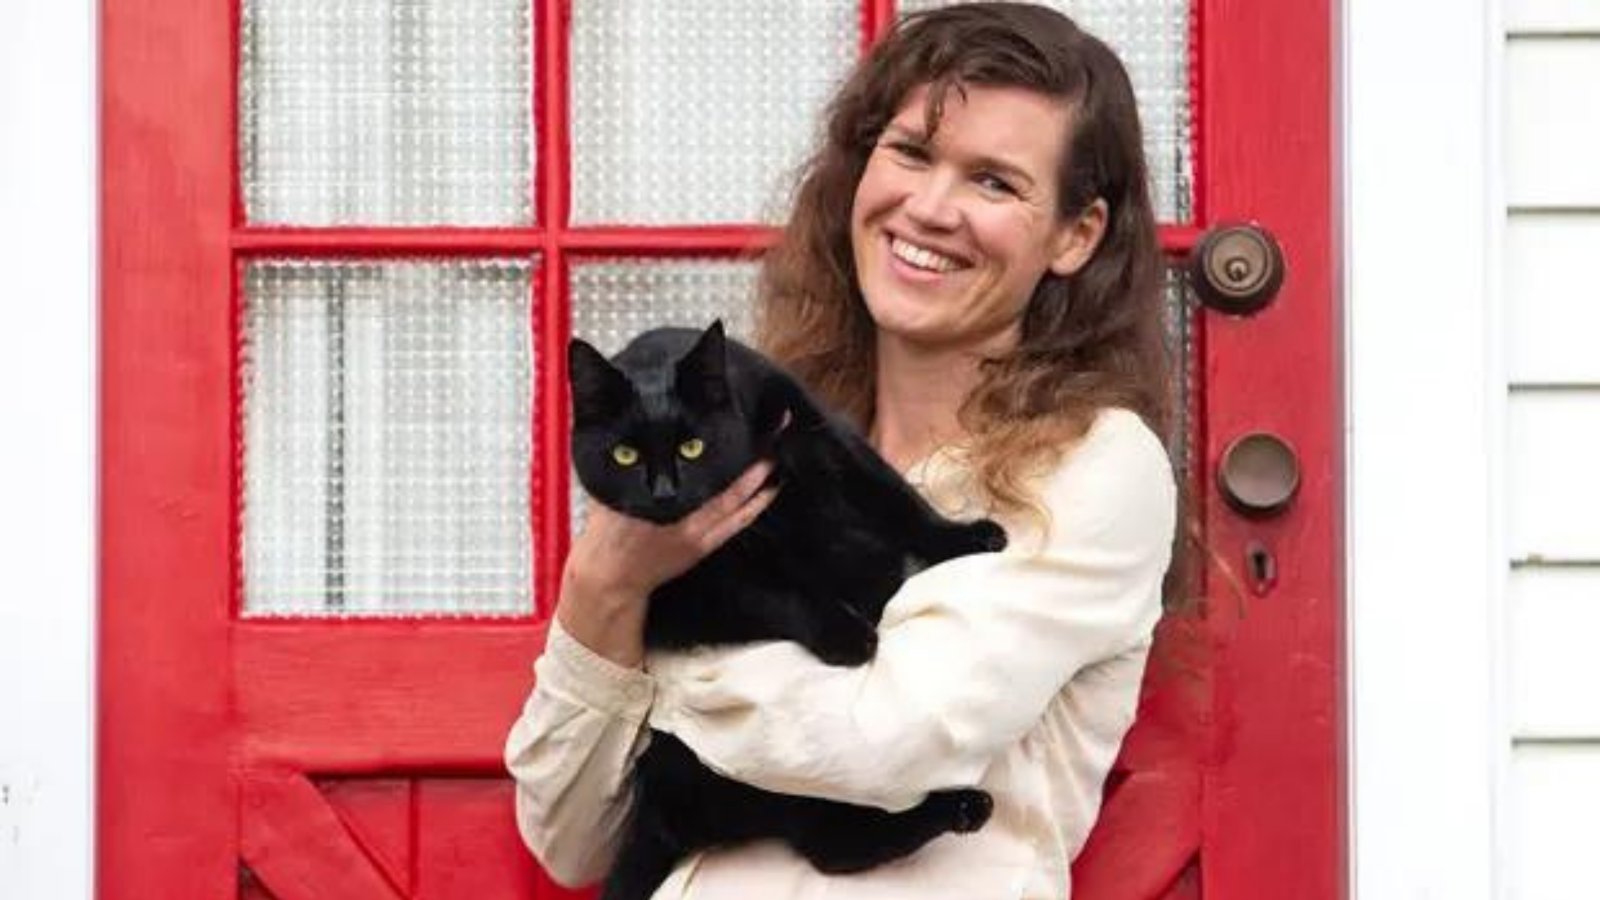 woman holding black cat standing in front of red door with white house